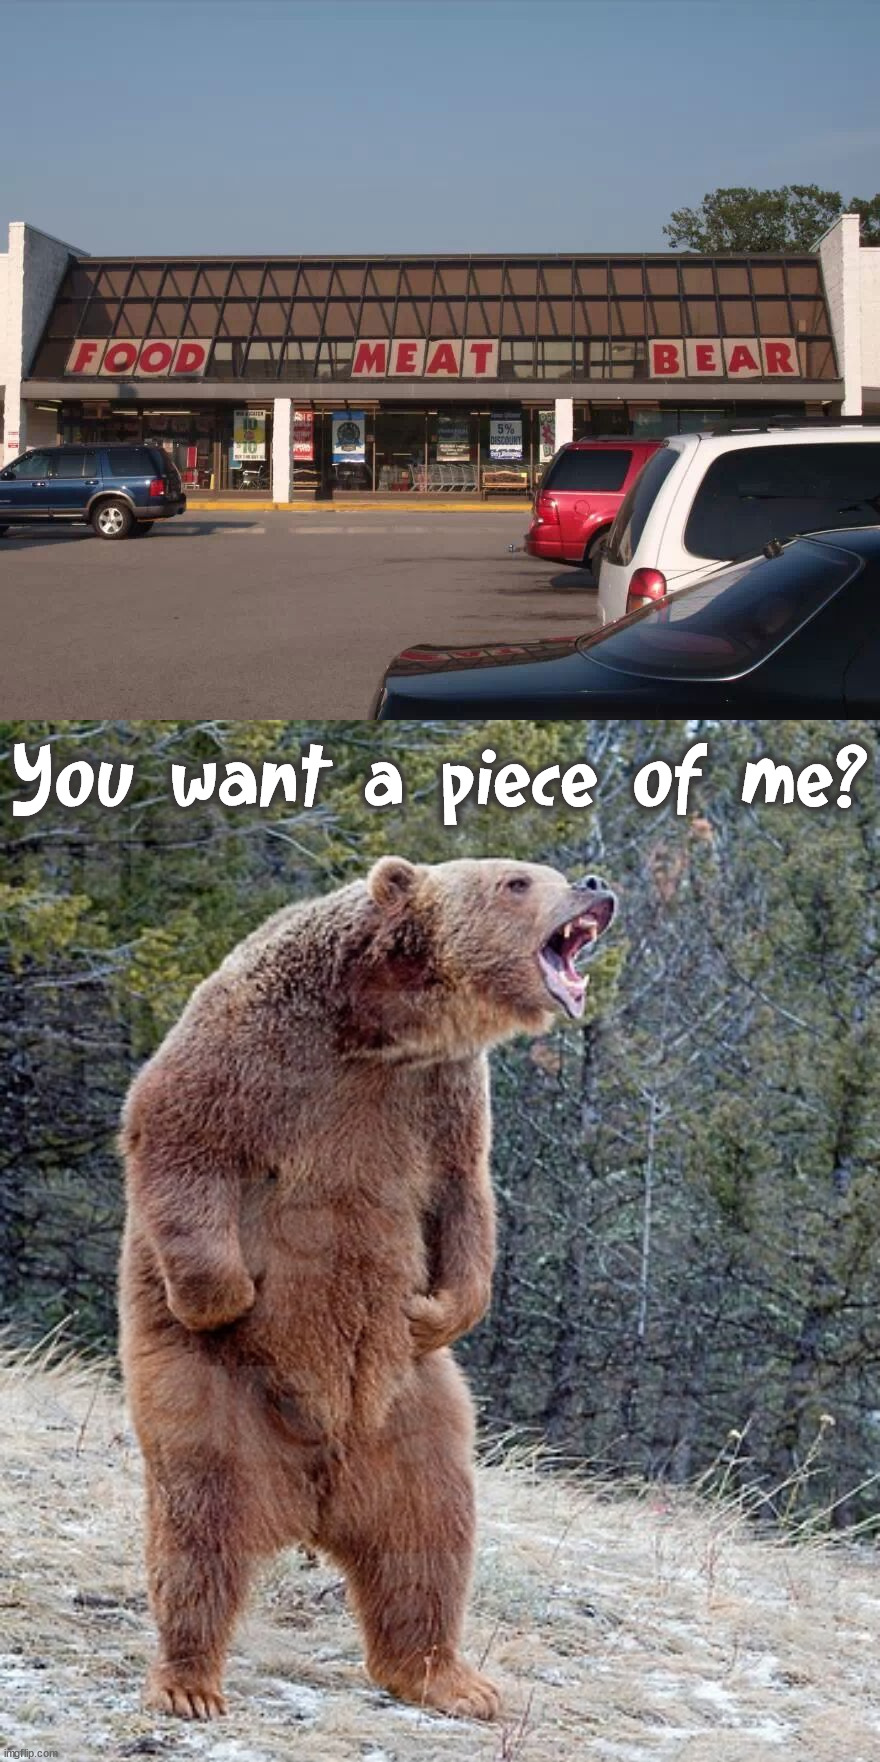 I think they might mean beer? | You want a piece of me? | image tagged in angry bear,grocery store,shopping,piece of me | made w/ Imgflip meme maker